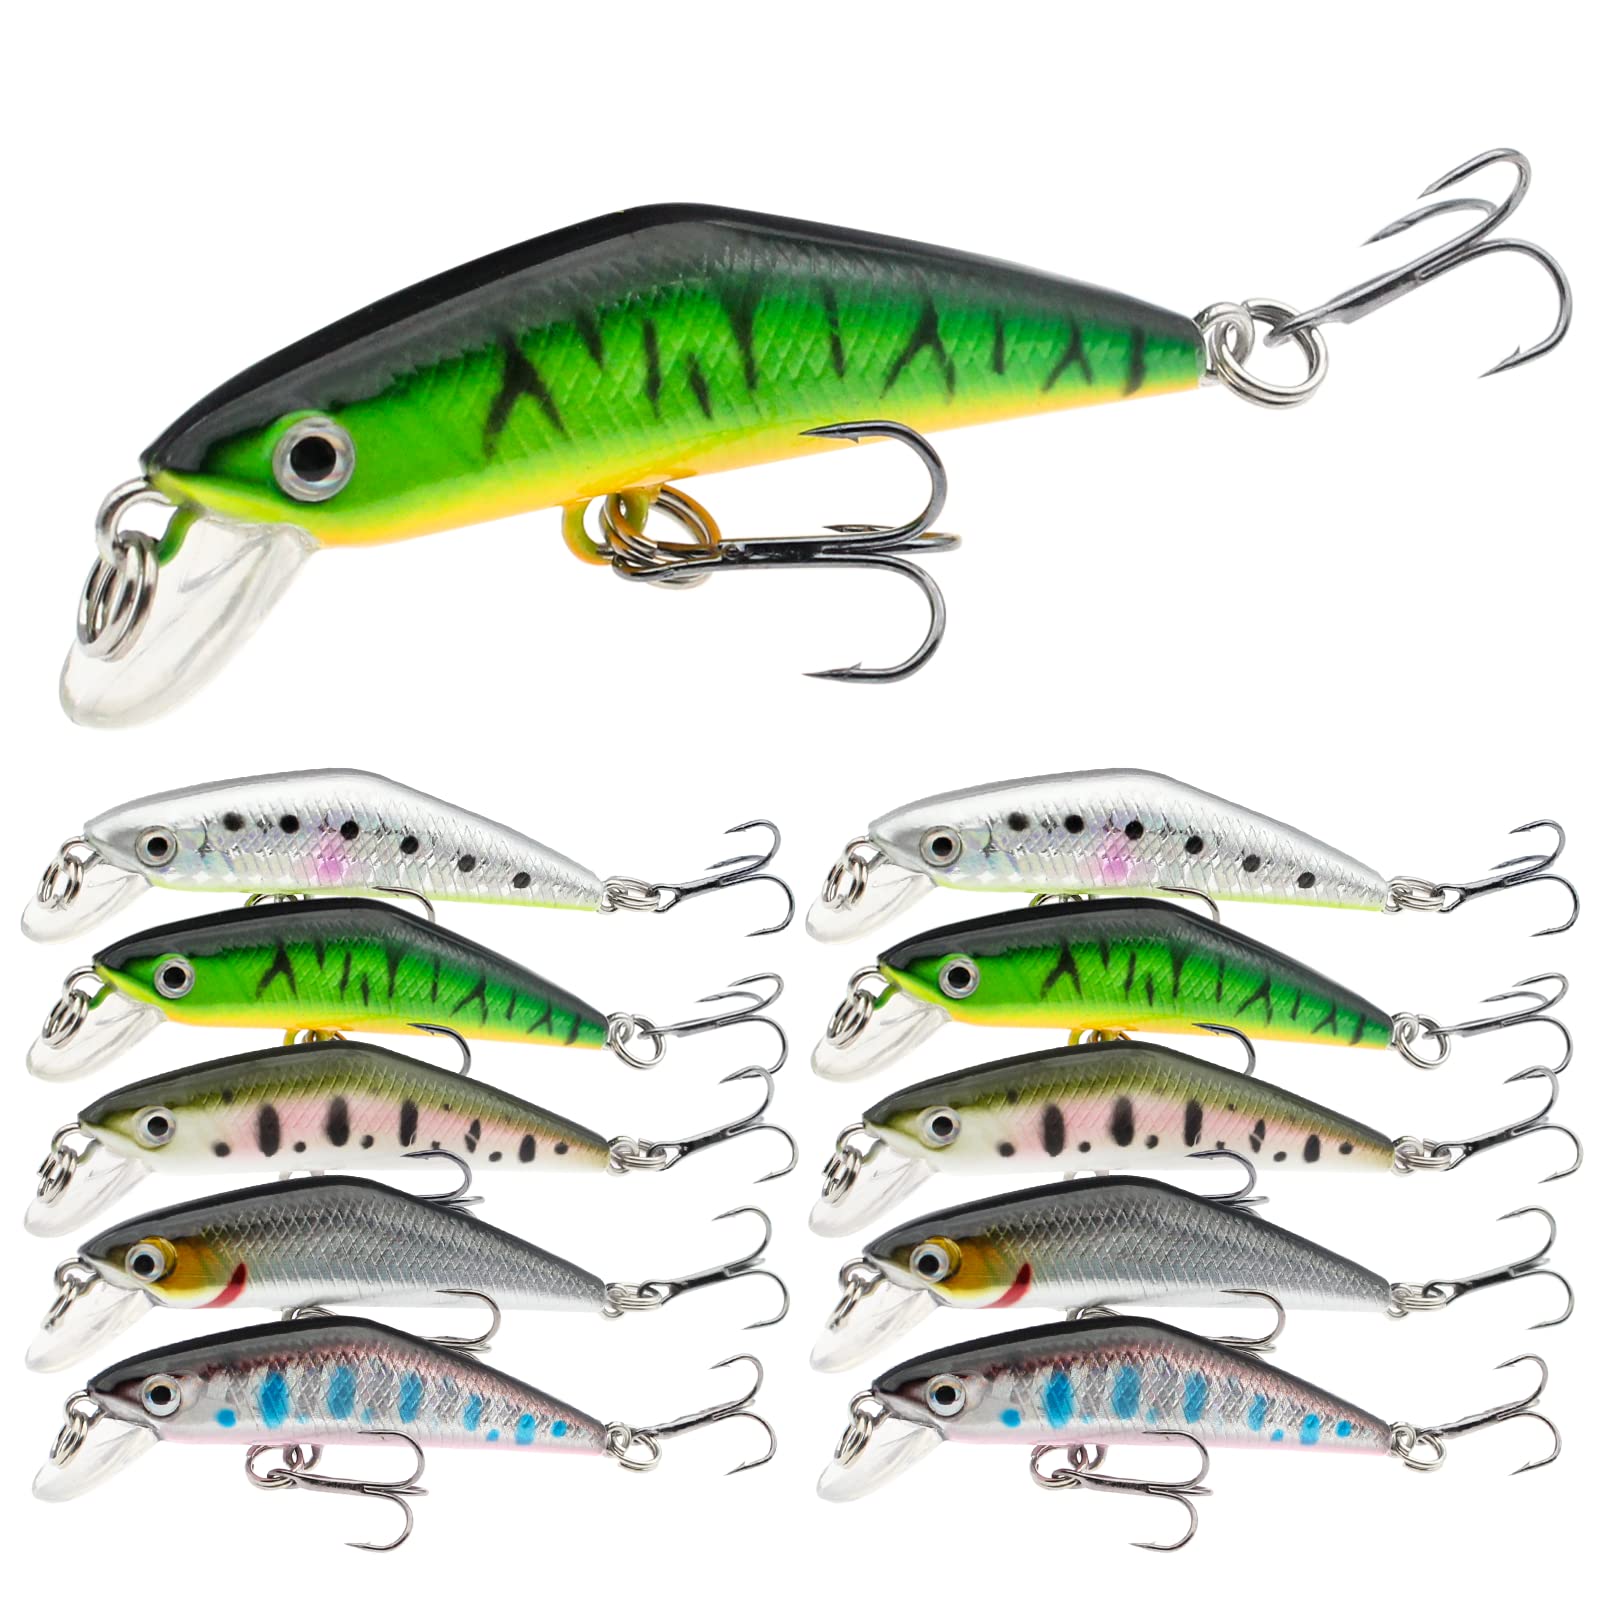 Fishing Lures, Minnow Popper Crank Baits Pencil Bass Trout Fishing Lures  with Hooks, Topwater Artificial Hard Swimbaits for Saltwater Freshwater  Trout Walleye Blueback Salmon Catfish A-10pc,2.68,0.1oz